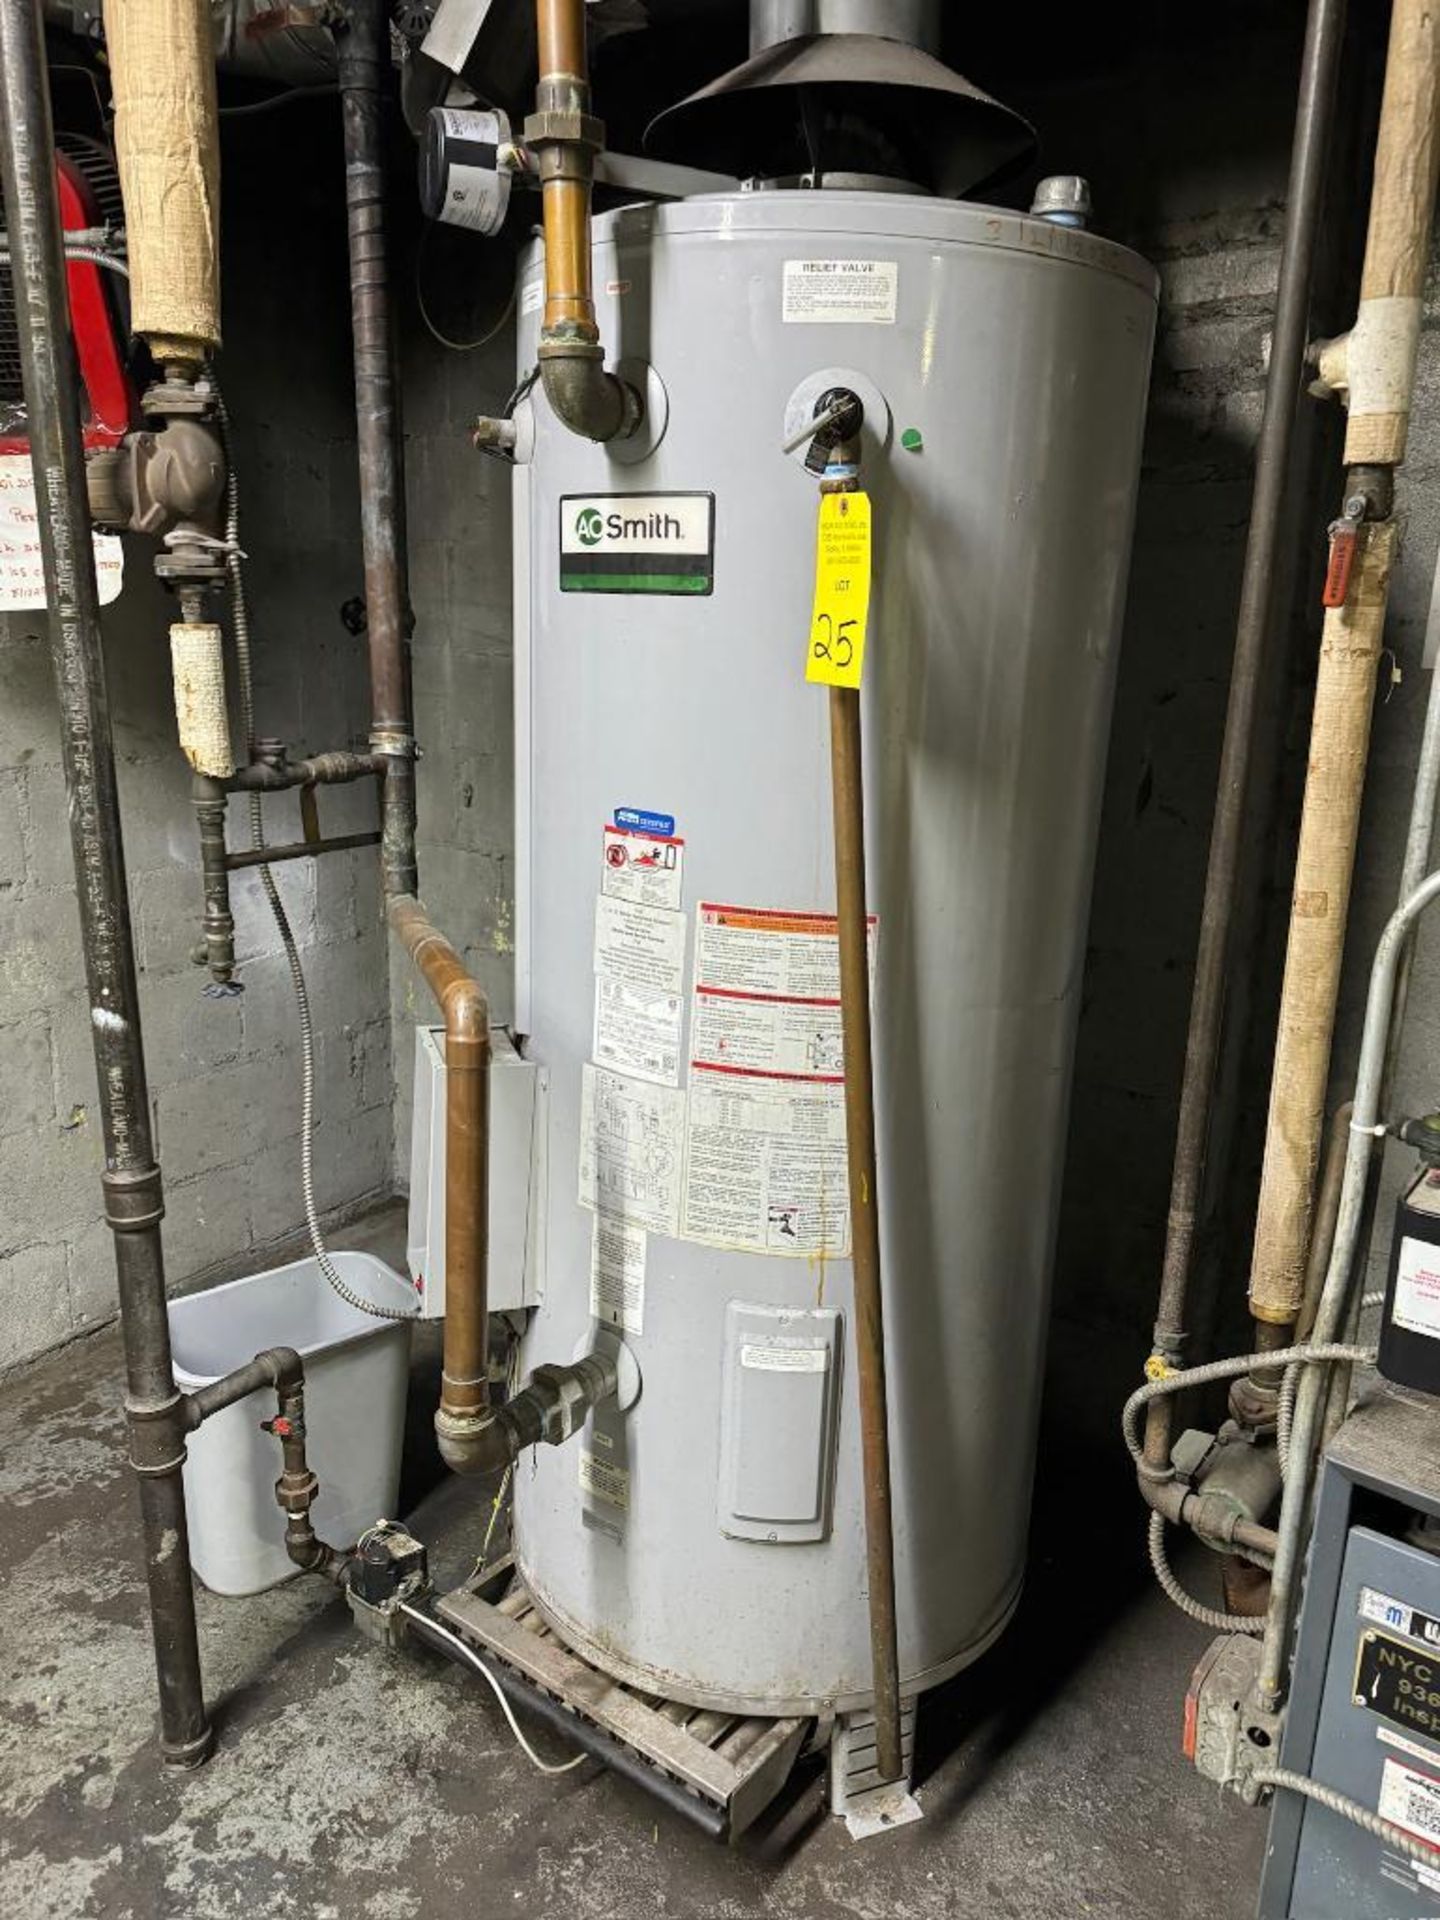 AO Smith Hot Water Heater - Image 3 of 6